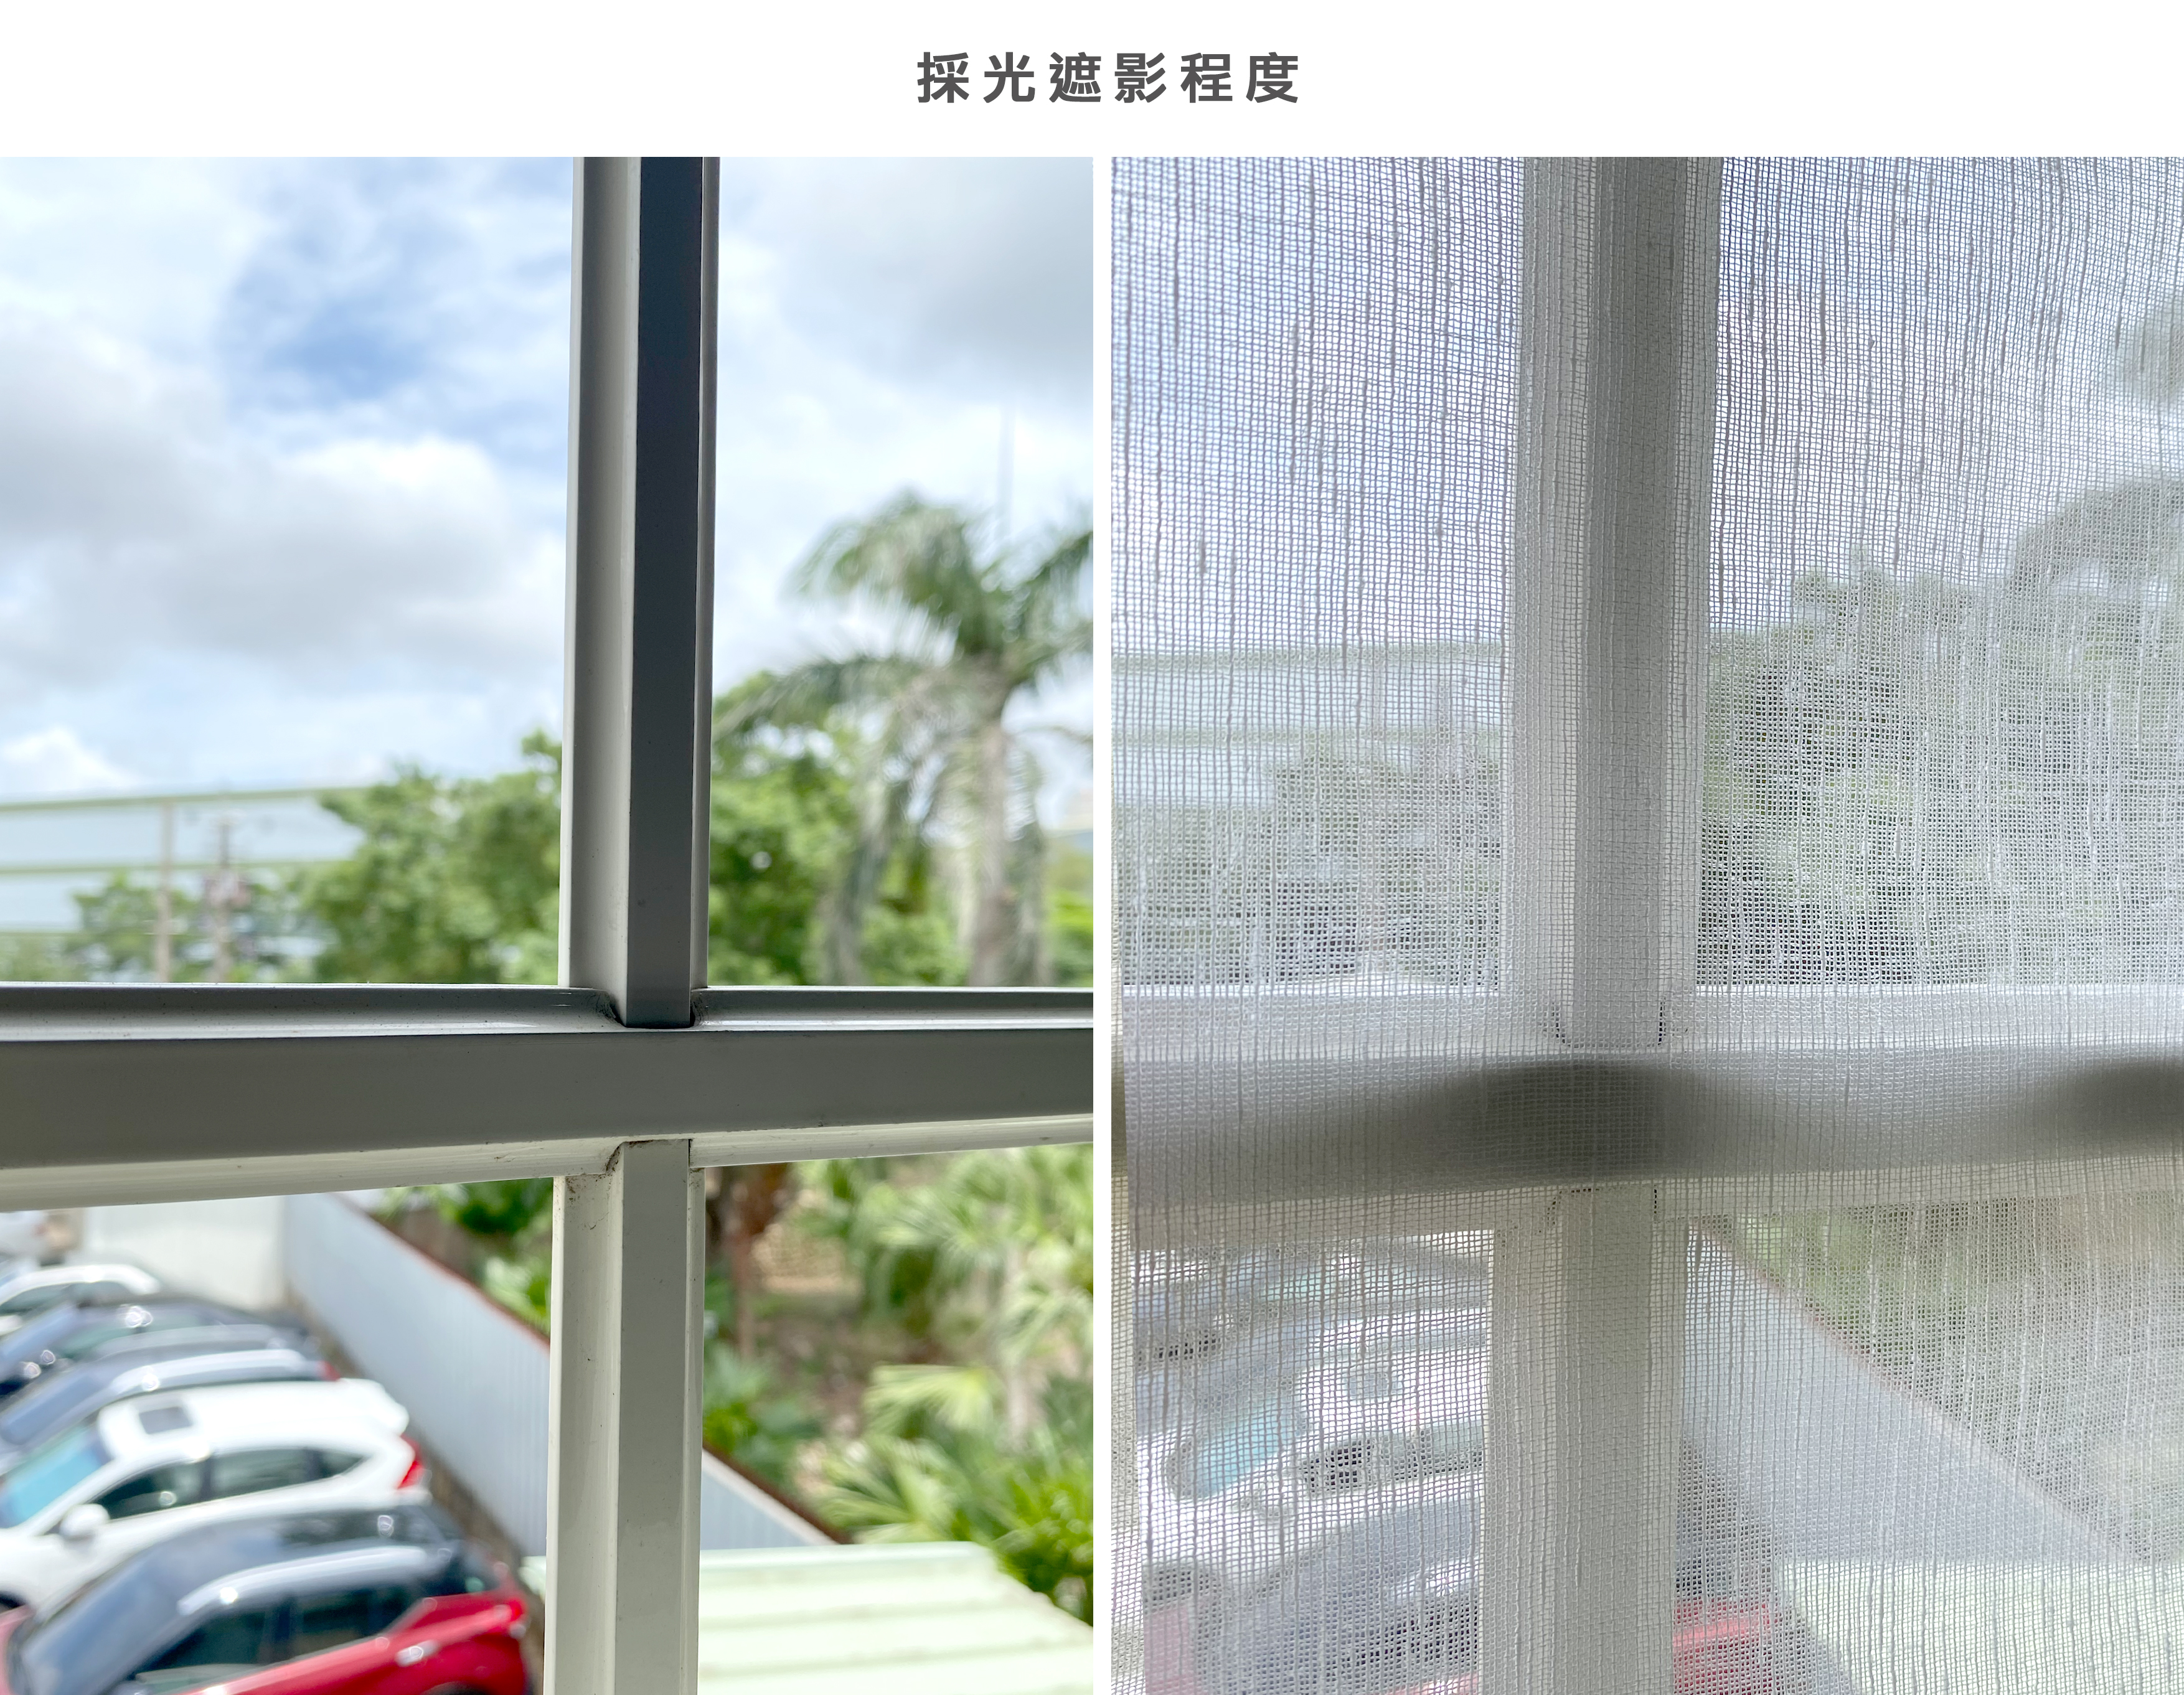 Lo-Fi House Select Curtains　Sheer Linen Sheer - Cream Child Safety／Cordless Blinds & Shades Light Filtering Blinds & Shades Semi-Transparent Blinds & Shades Motorized Blinds／Smart Blinds & Shades